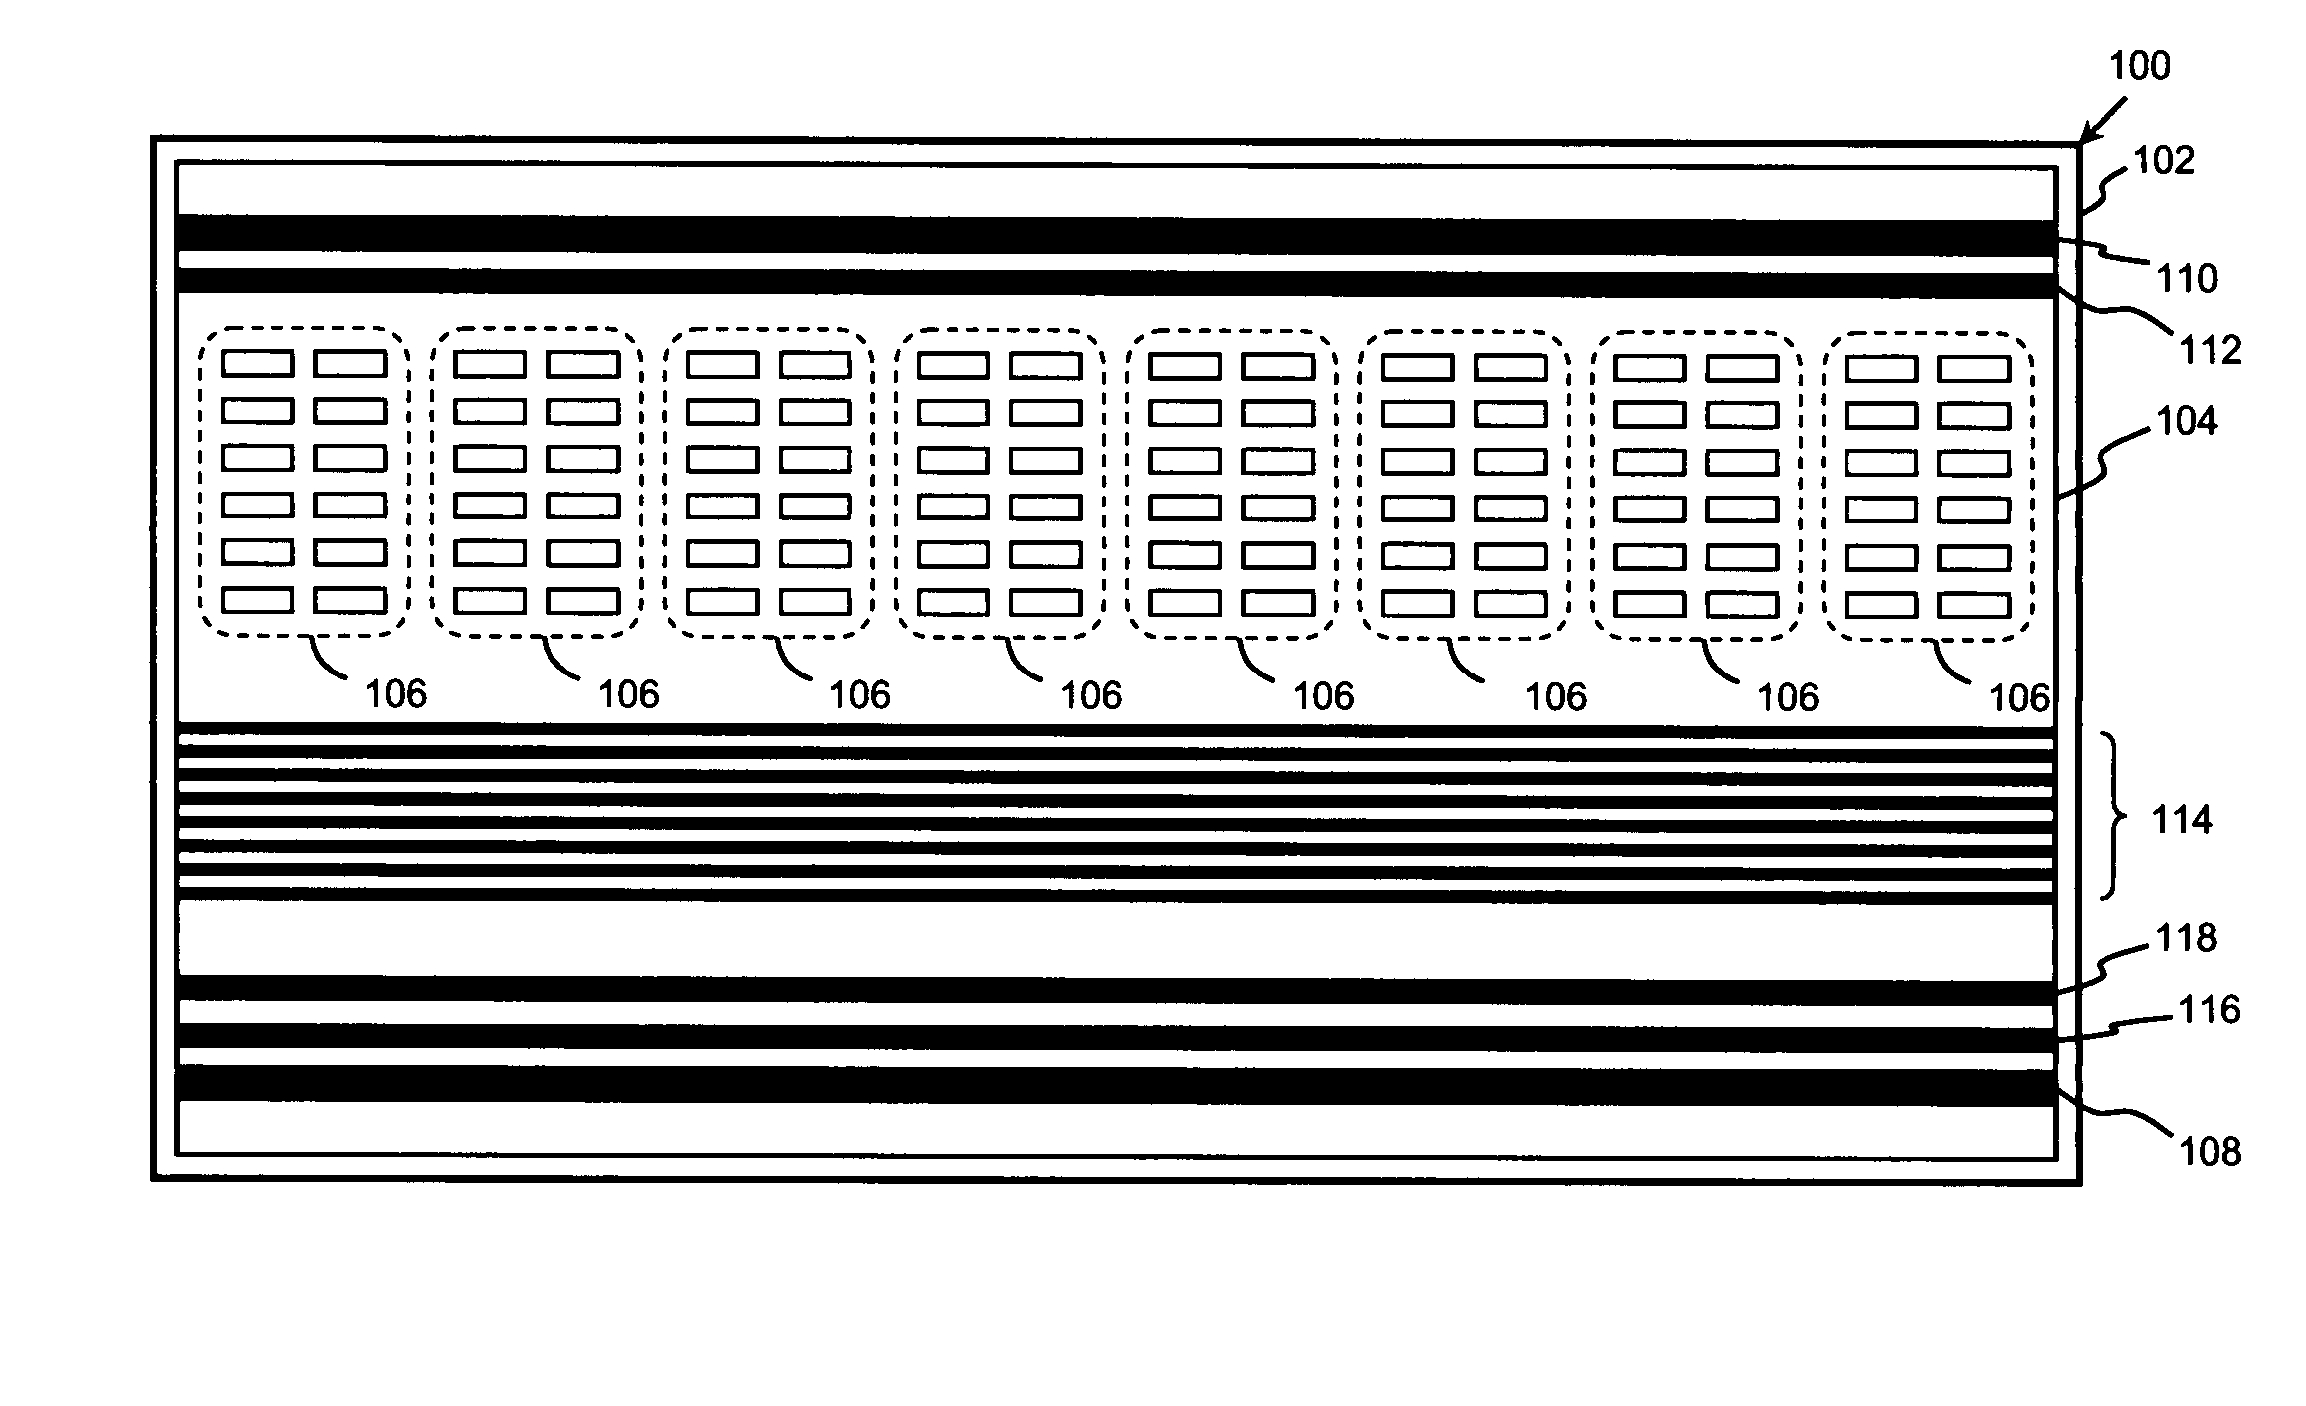 Modular, extensible electrical and communication systems, methods, and devices